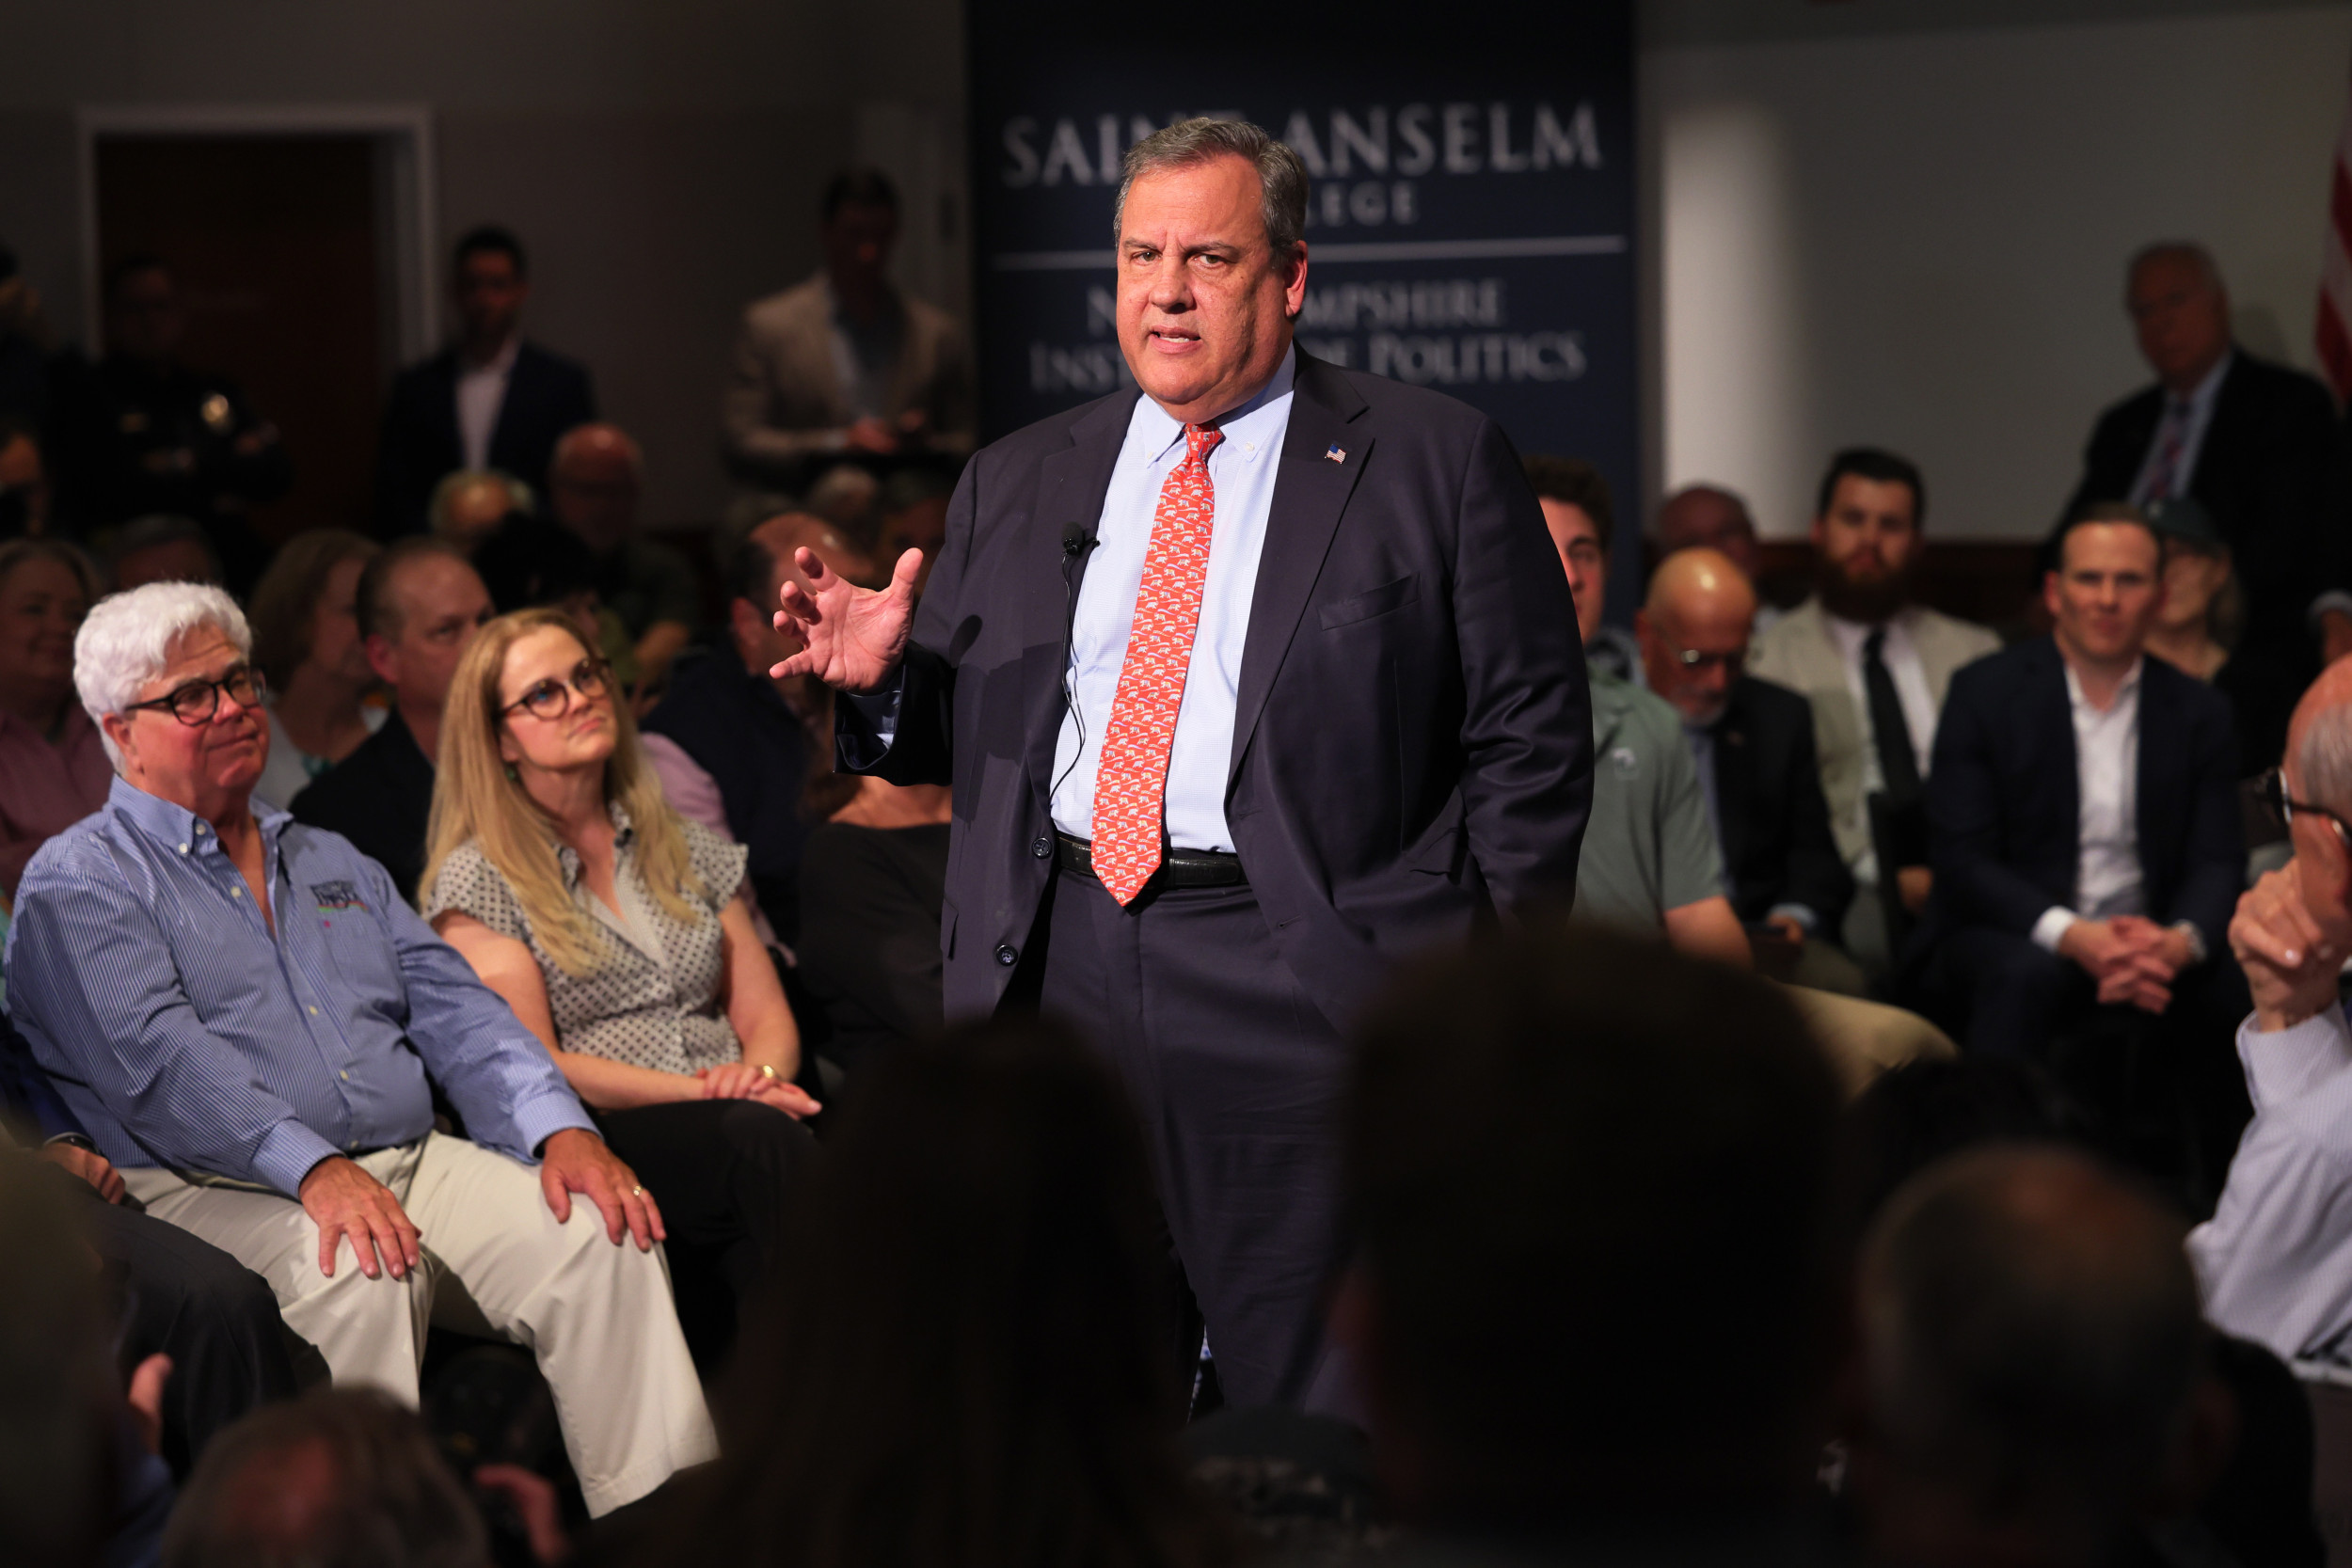 Chris Christie turns Donald Trump’s own attack against him